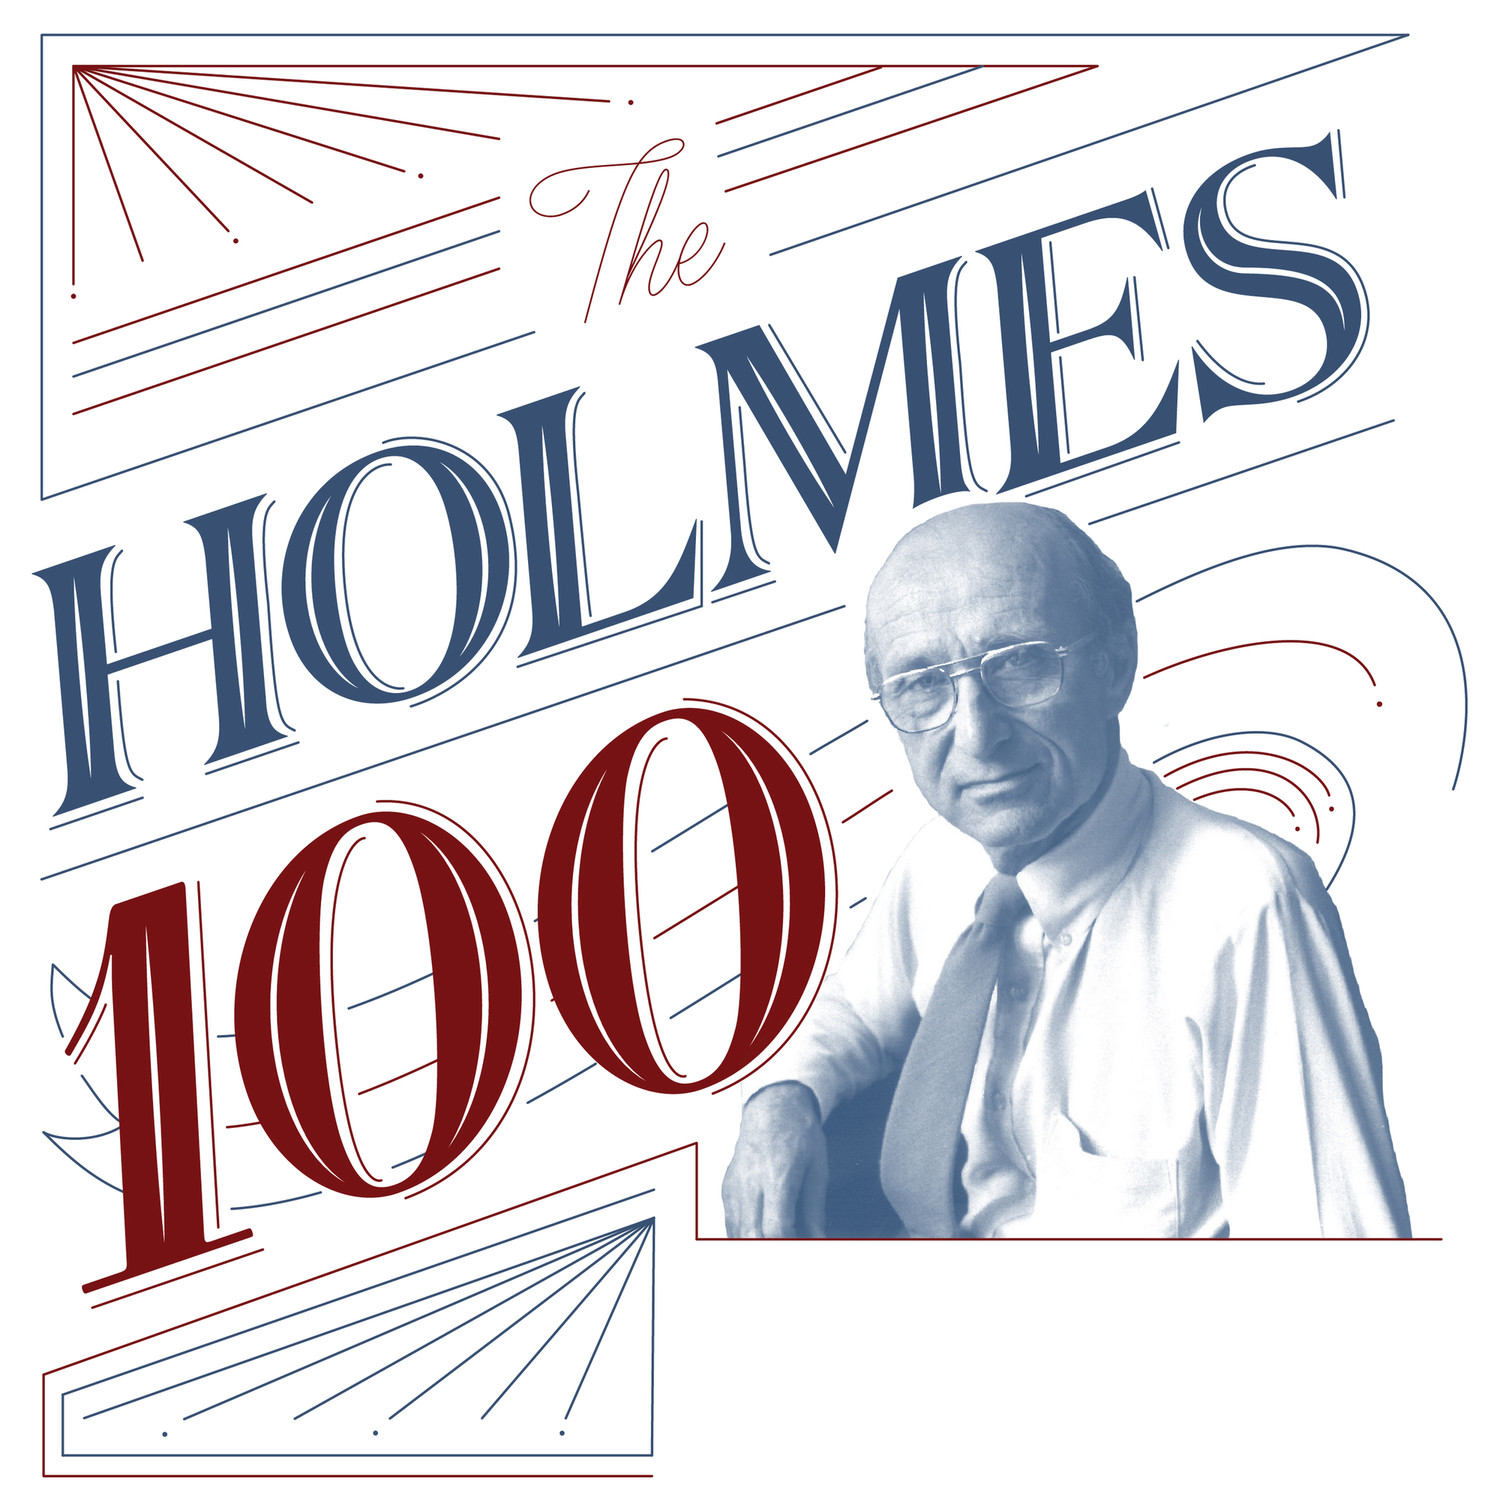 The Holmes Hundred